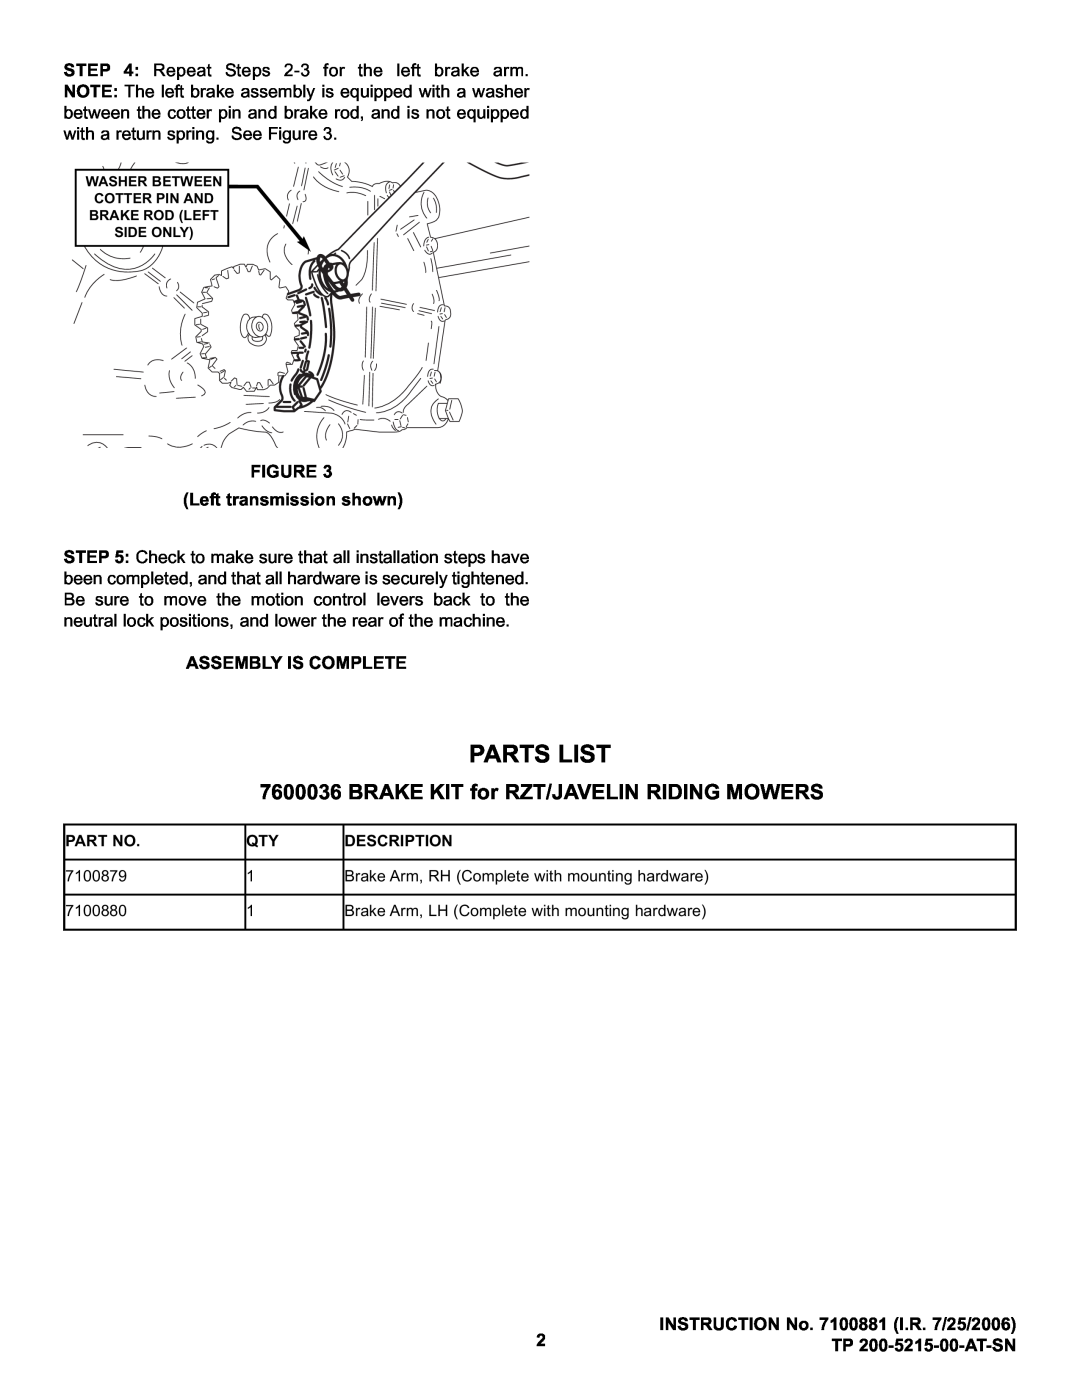 Snapper 7600036 manual Parts List, BRAKE KIT for RZT/JAVELIN RIDING MOWERS 